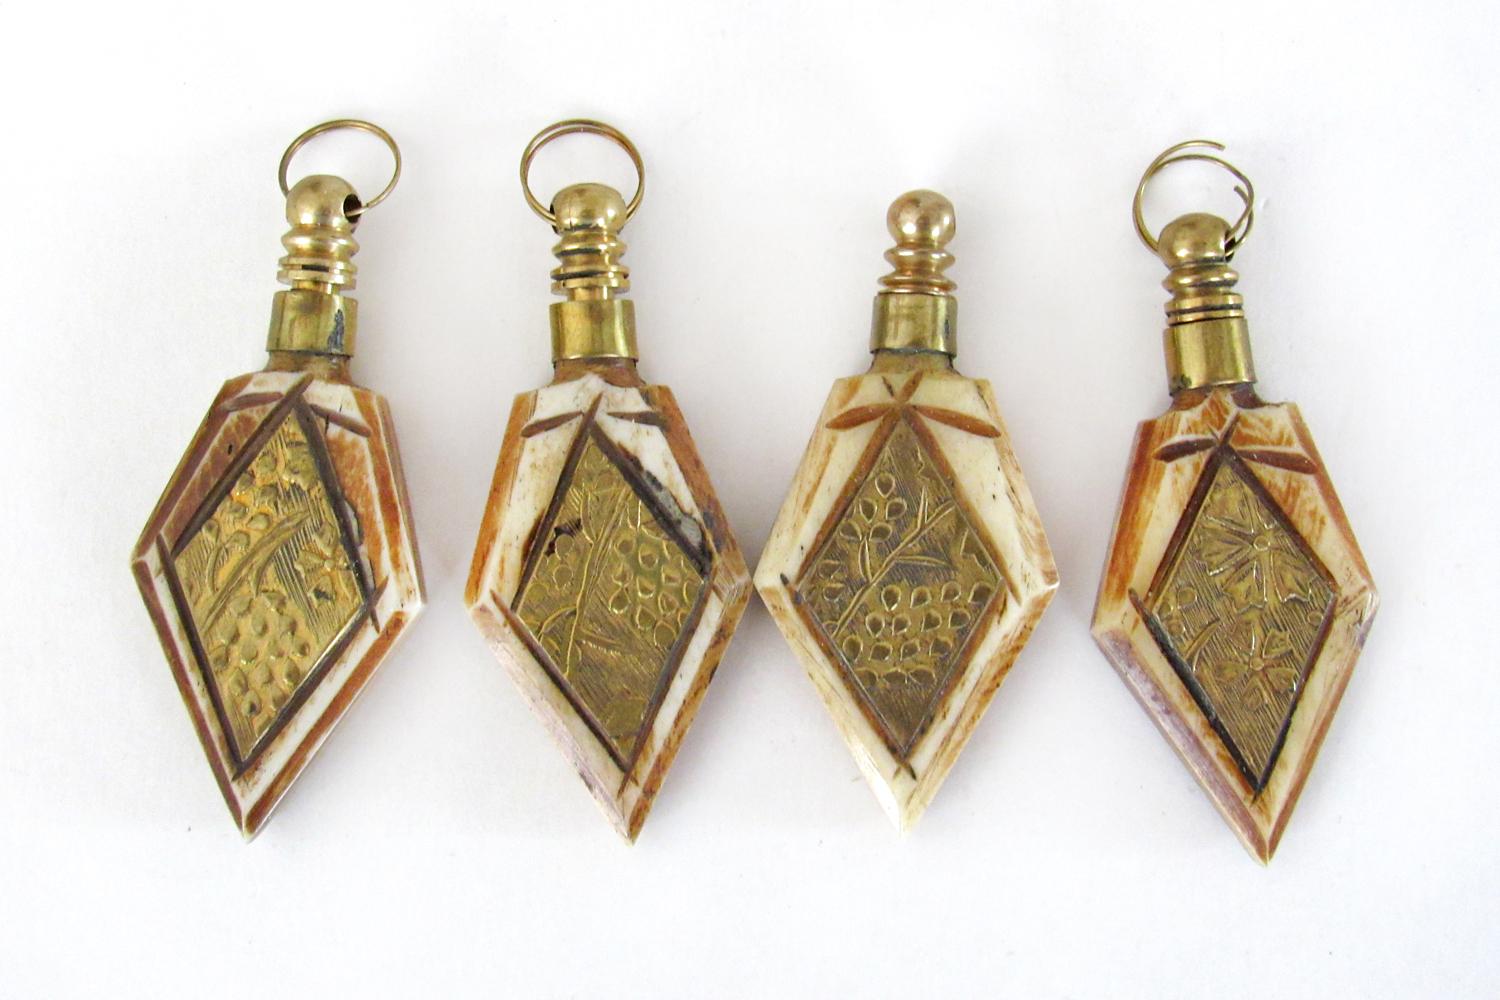 Ethnic Style Carved Bone and Brass Pendants for Jewelry Making - Set of 4 / Craft Supply